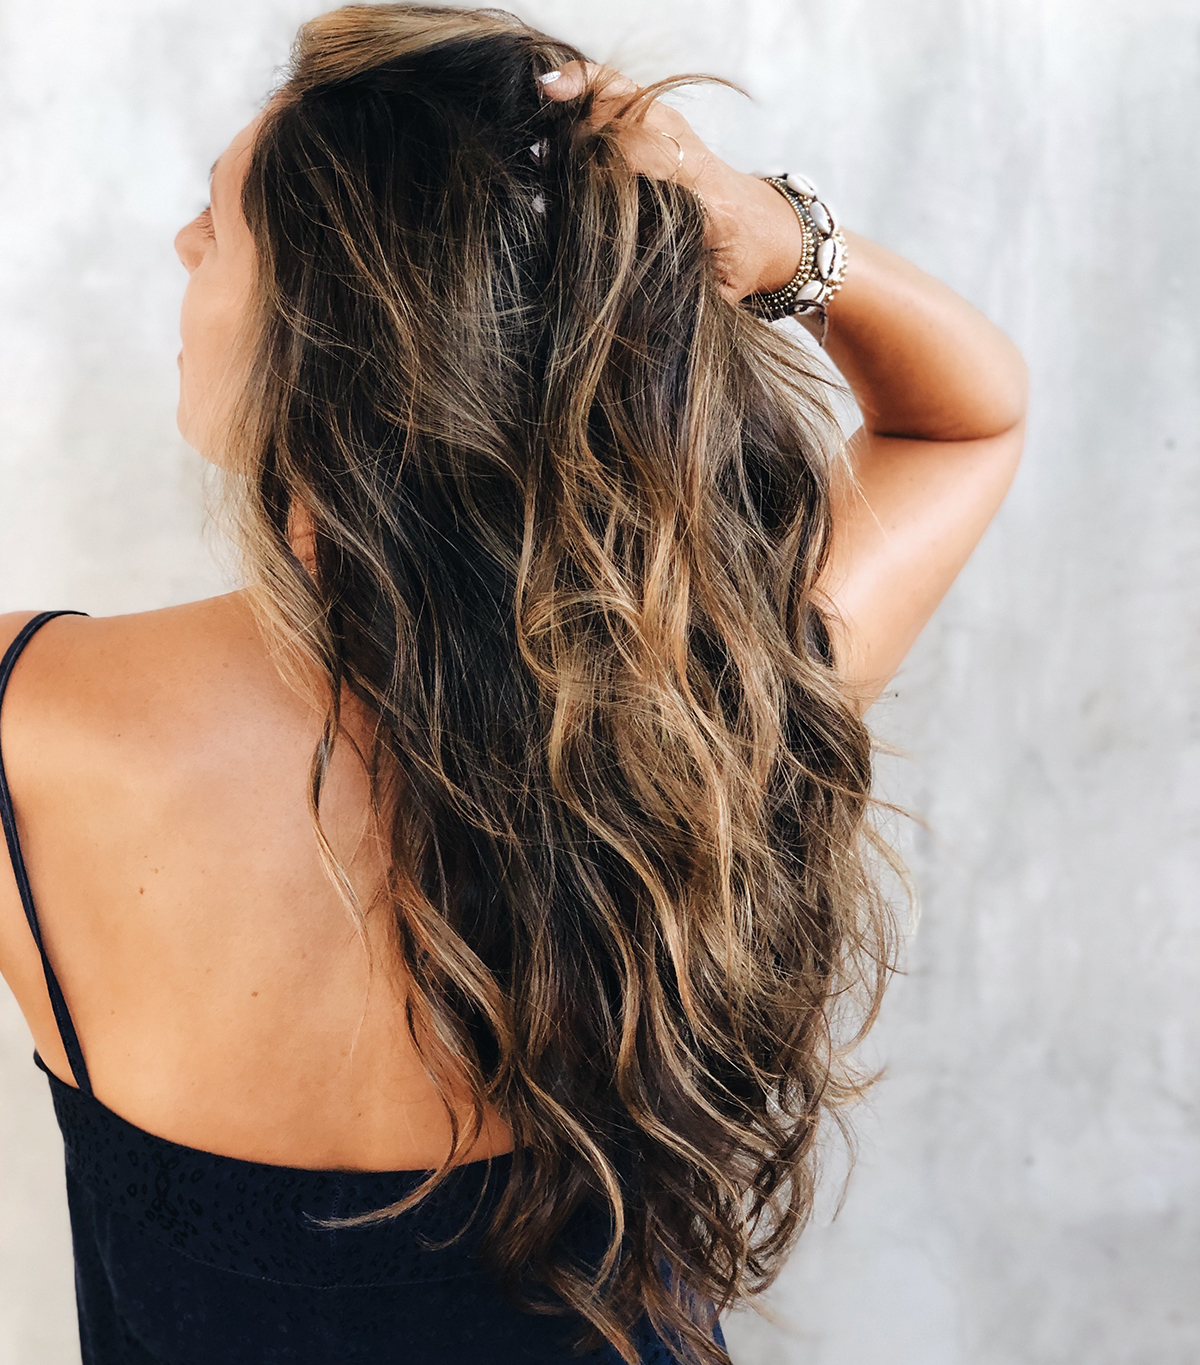 The 16 Best Hair Products for Women Over 50 | Who What Wear